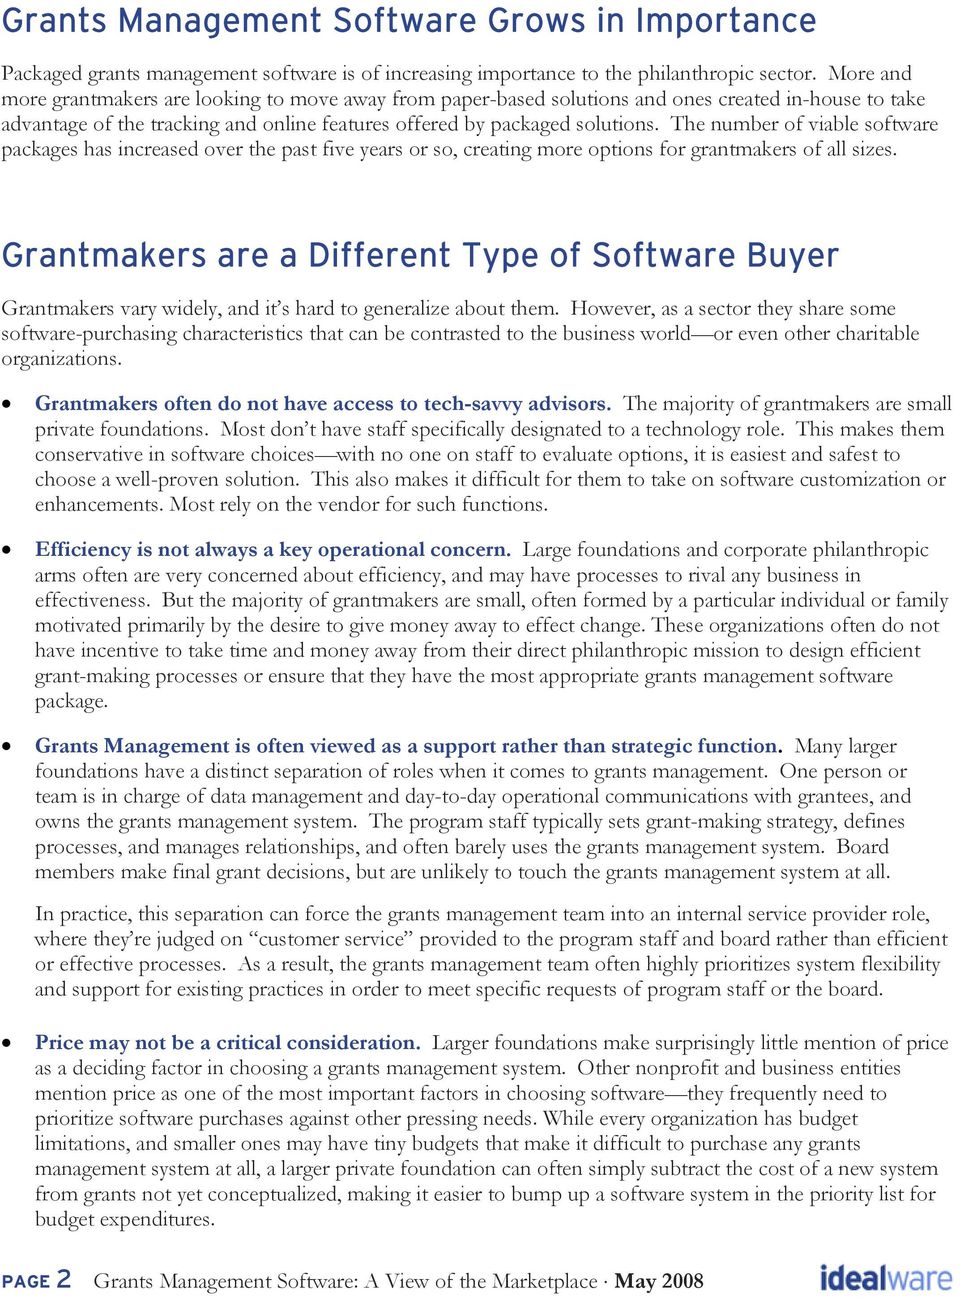 The number of viable software packages has increased over the past five years or so, creating more options for grantmakers of all sizes.